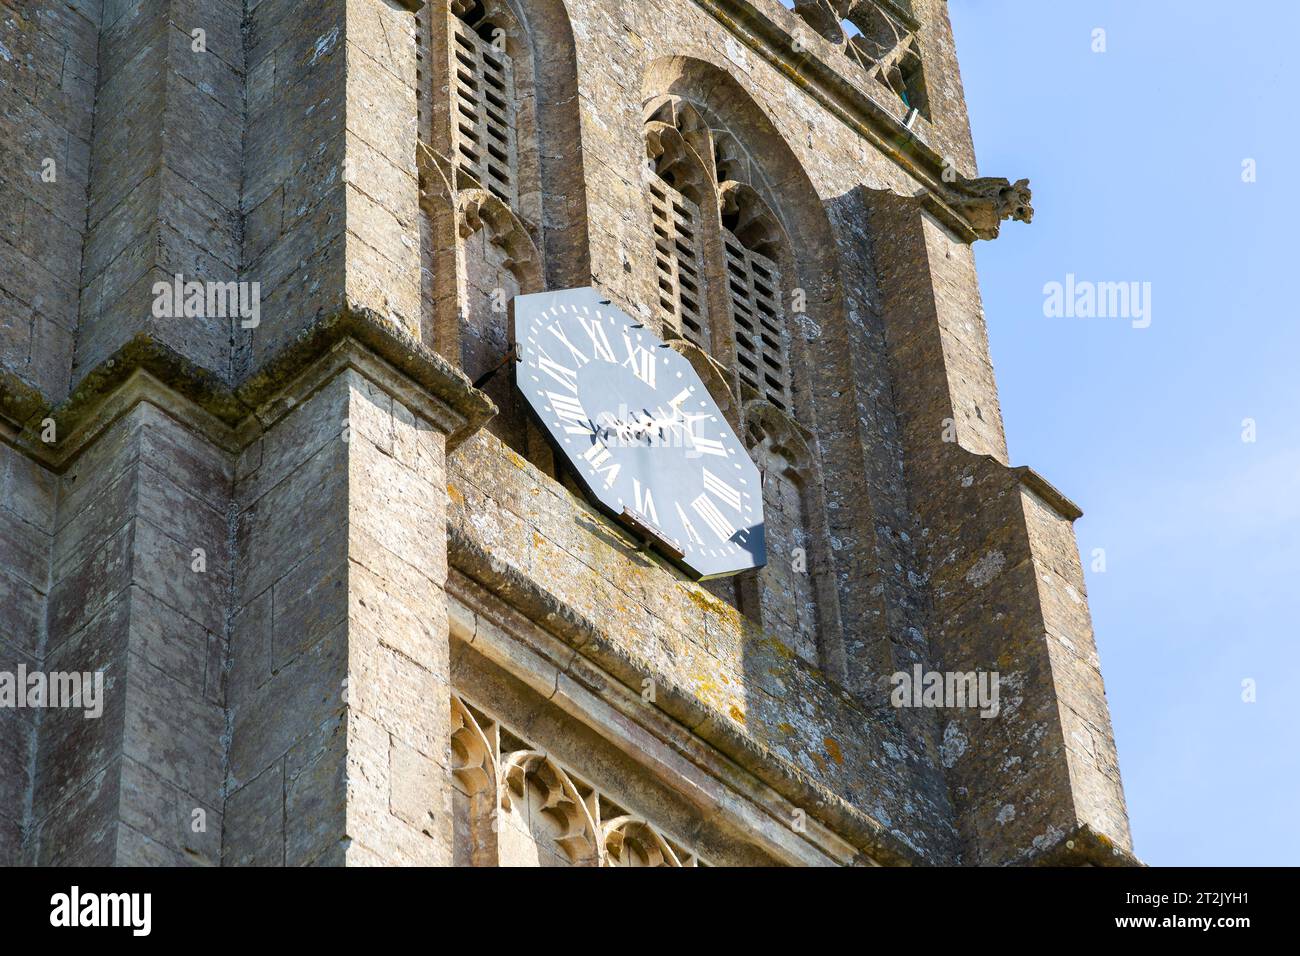 Clock with only one hand on tower of village church, Colerne, Wiltshire, England, UK Stock Photo